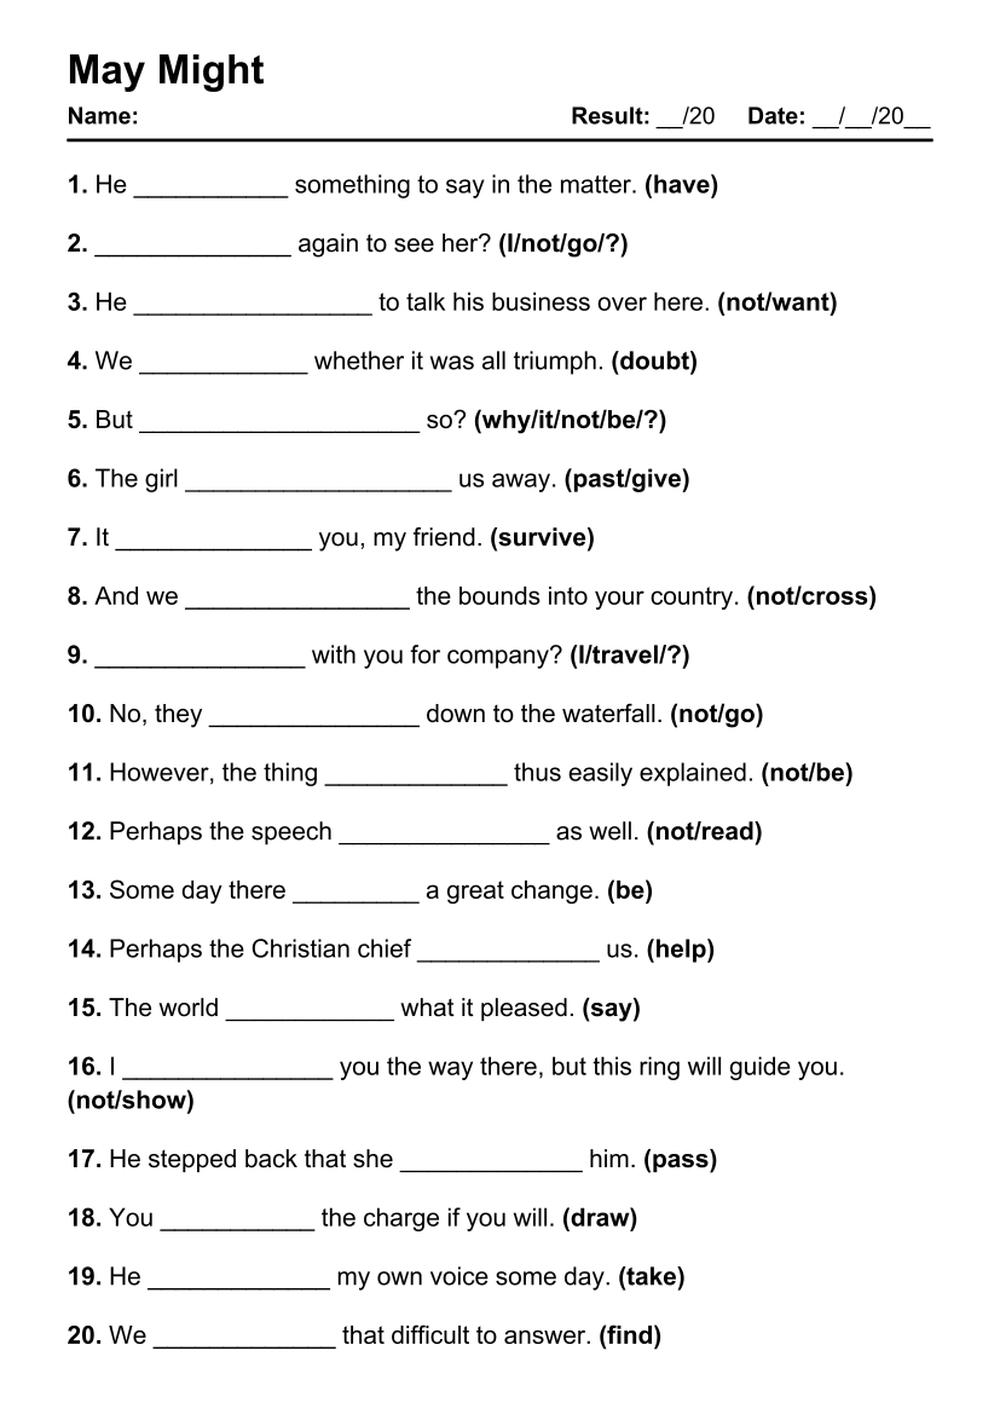 Printable May Might Exercises - PDF Worksheet with Answers - Test 9